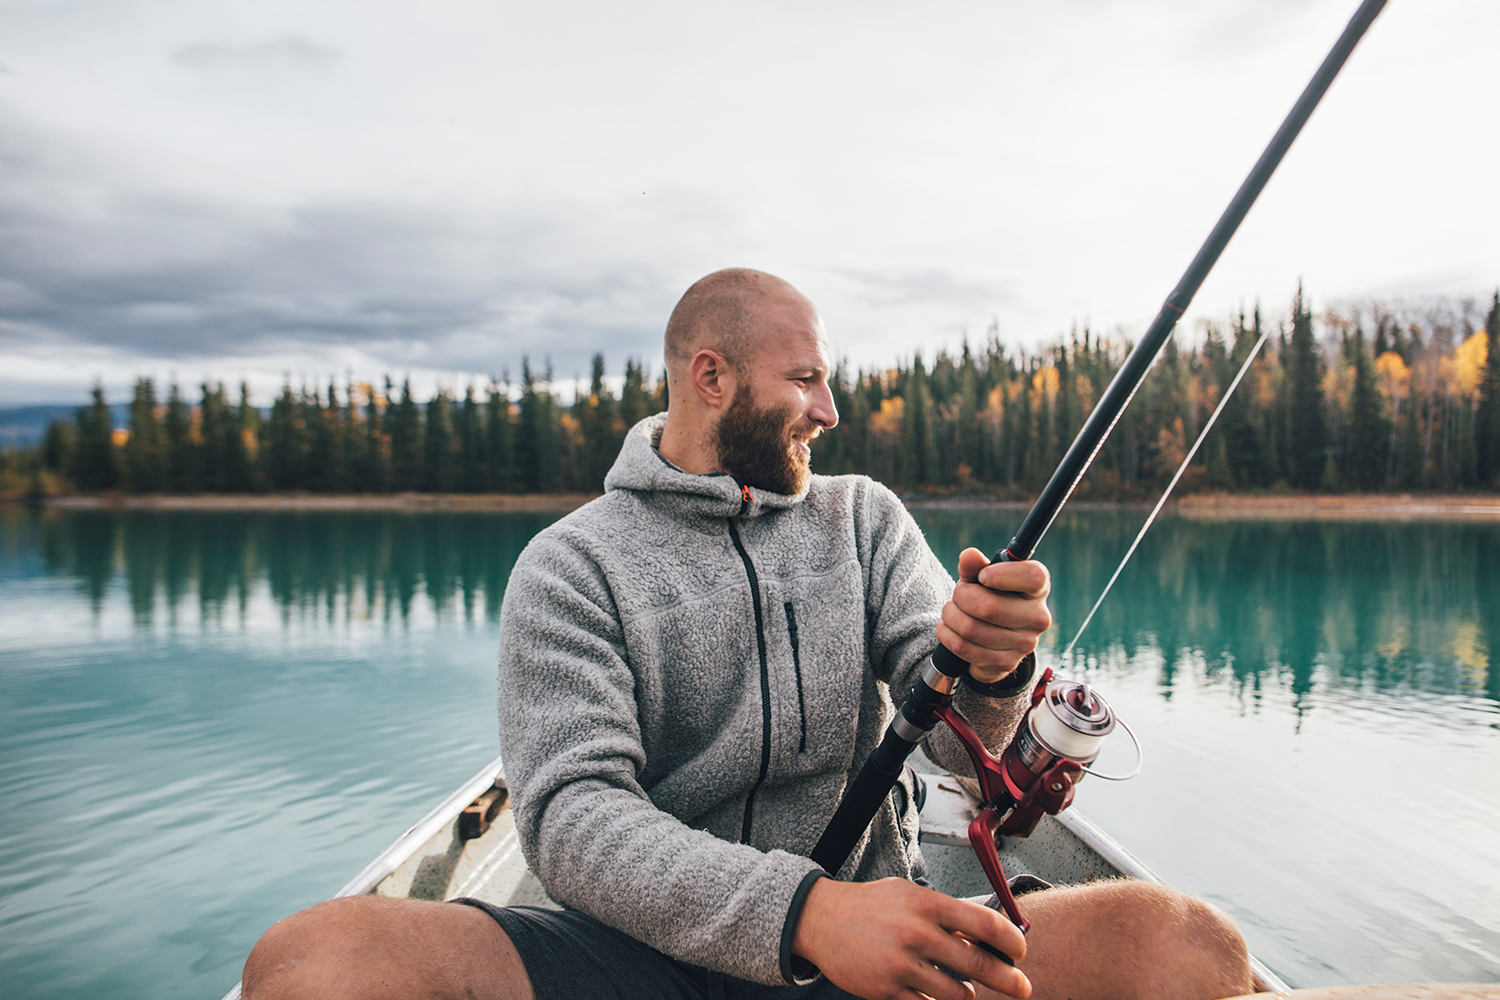 How to Fish: Fishing Tips For Beginners - The Manual